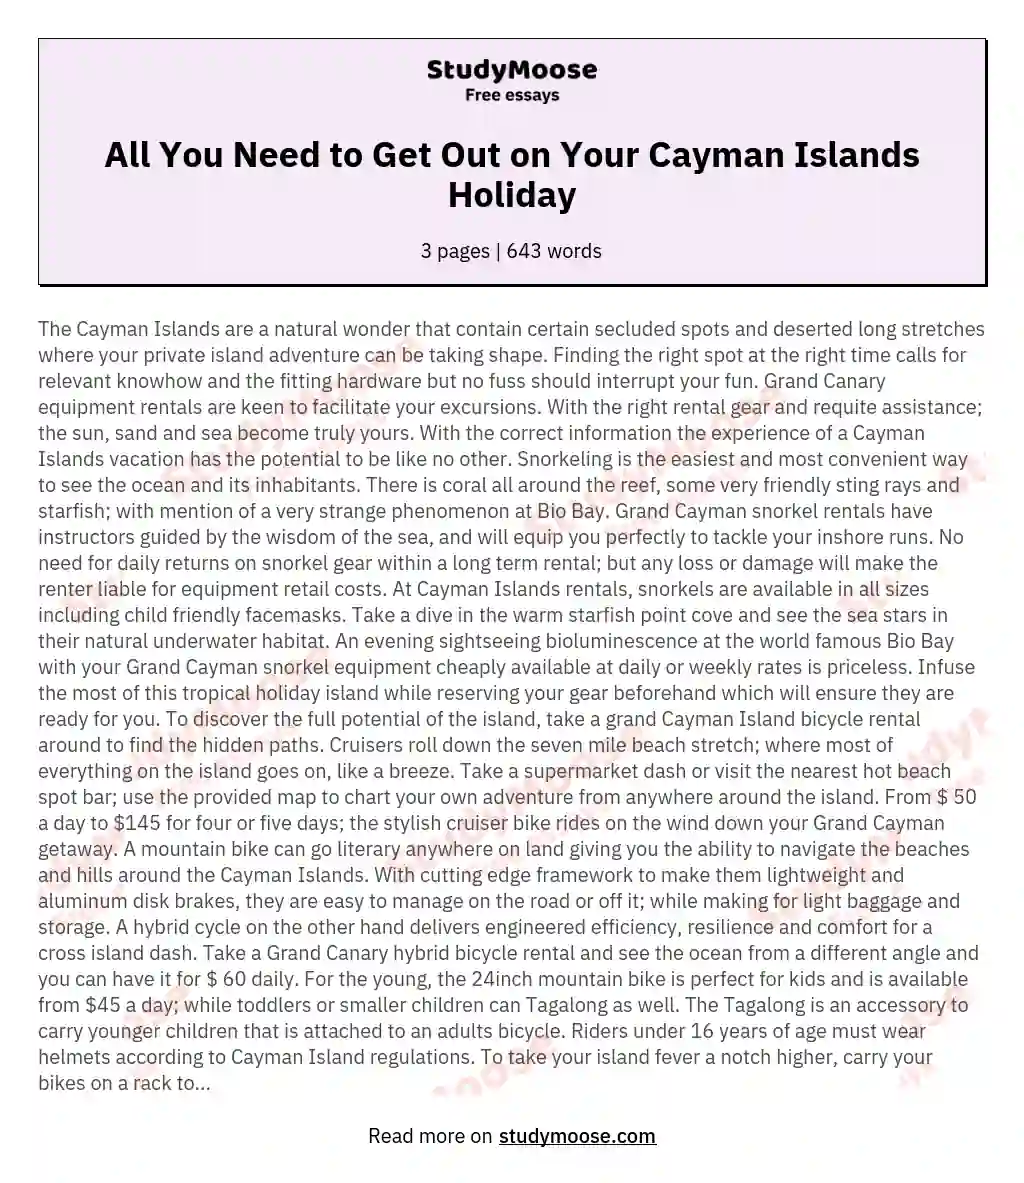 All You Need to Get Out on Your Cayman Islands Holiday essay